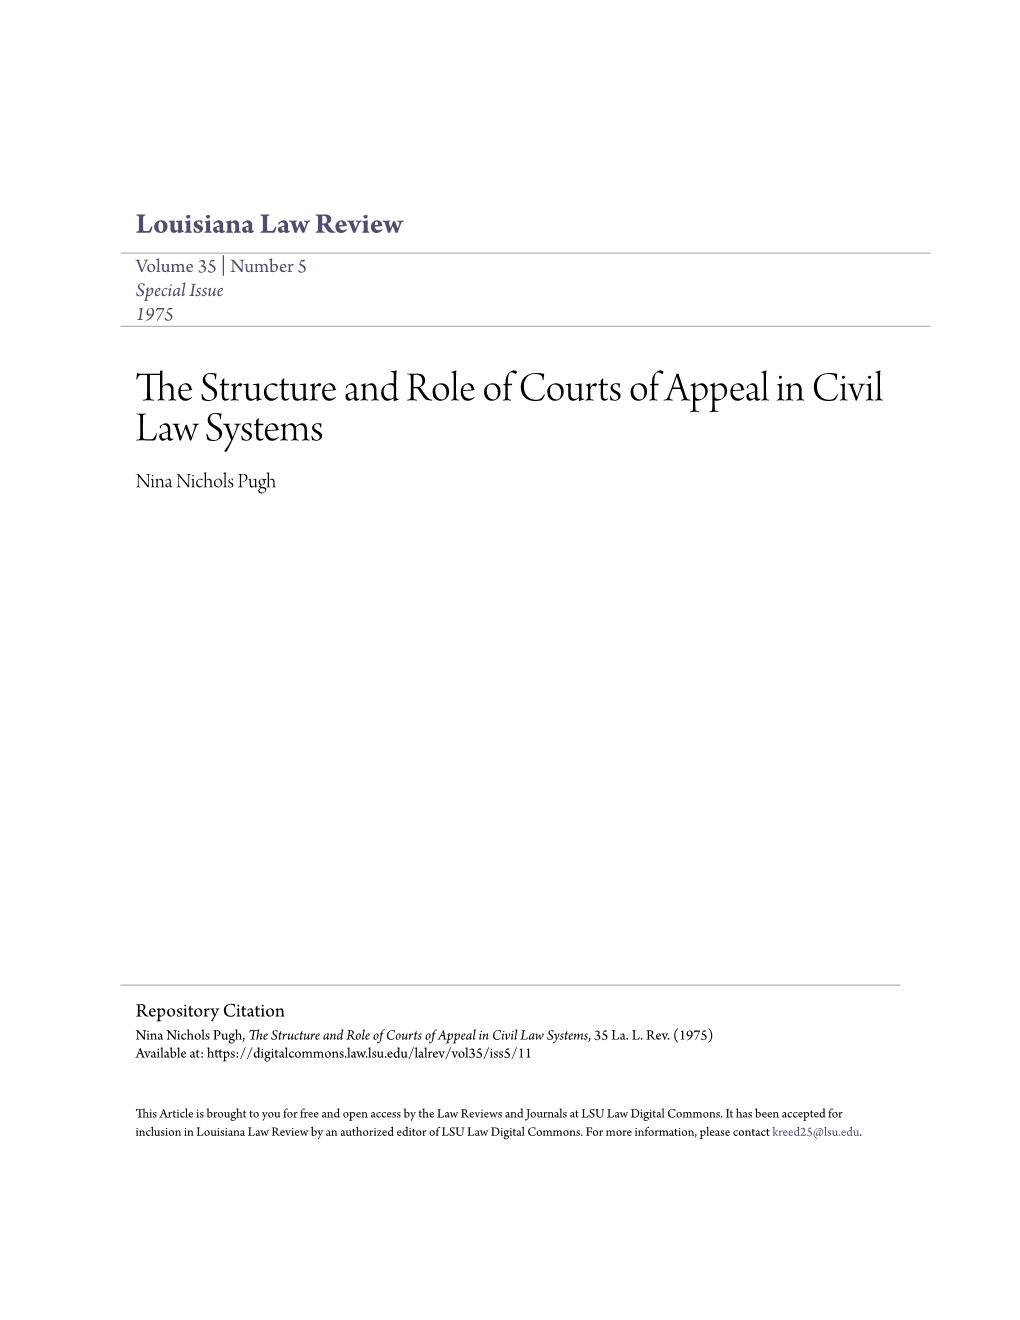 The Structure and Role of Courts of Appeal in Civil Law Systems, 35 La